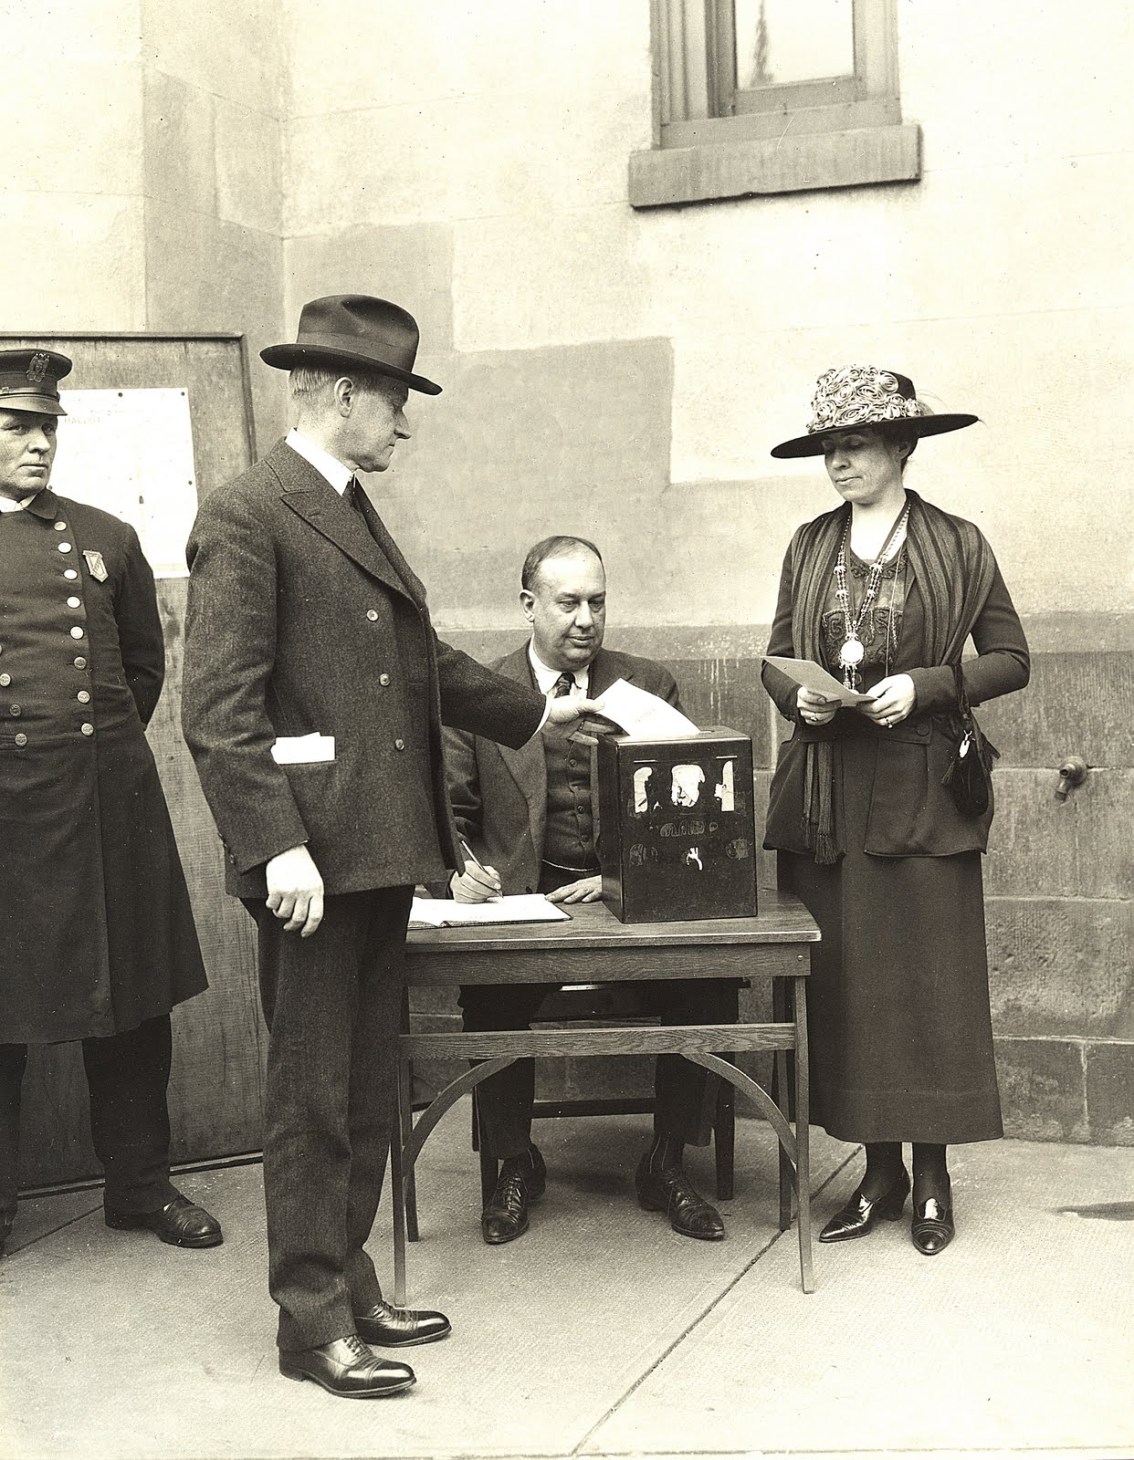 The Coolidges vote together, November 2, 1920. The Nineteenth Amendment, ratified in August of 1920, recognized suffrage for women nationwide and enabled Grace to join her husband and to cast her ballot for the first time. 